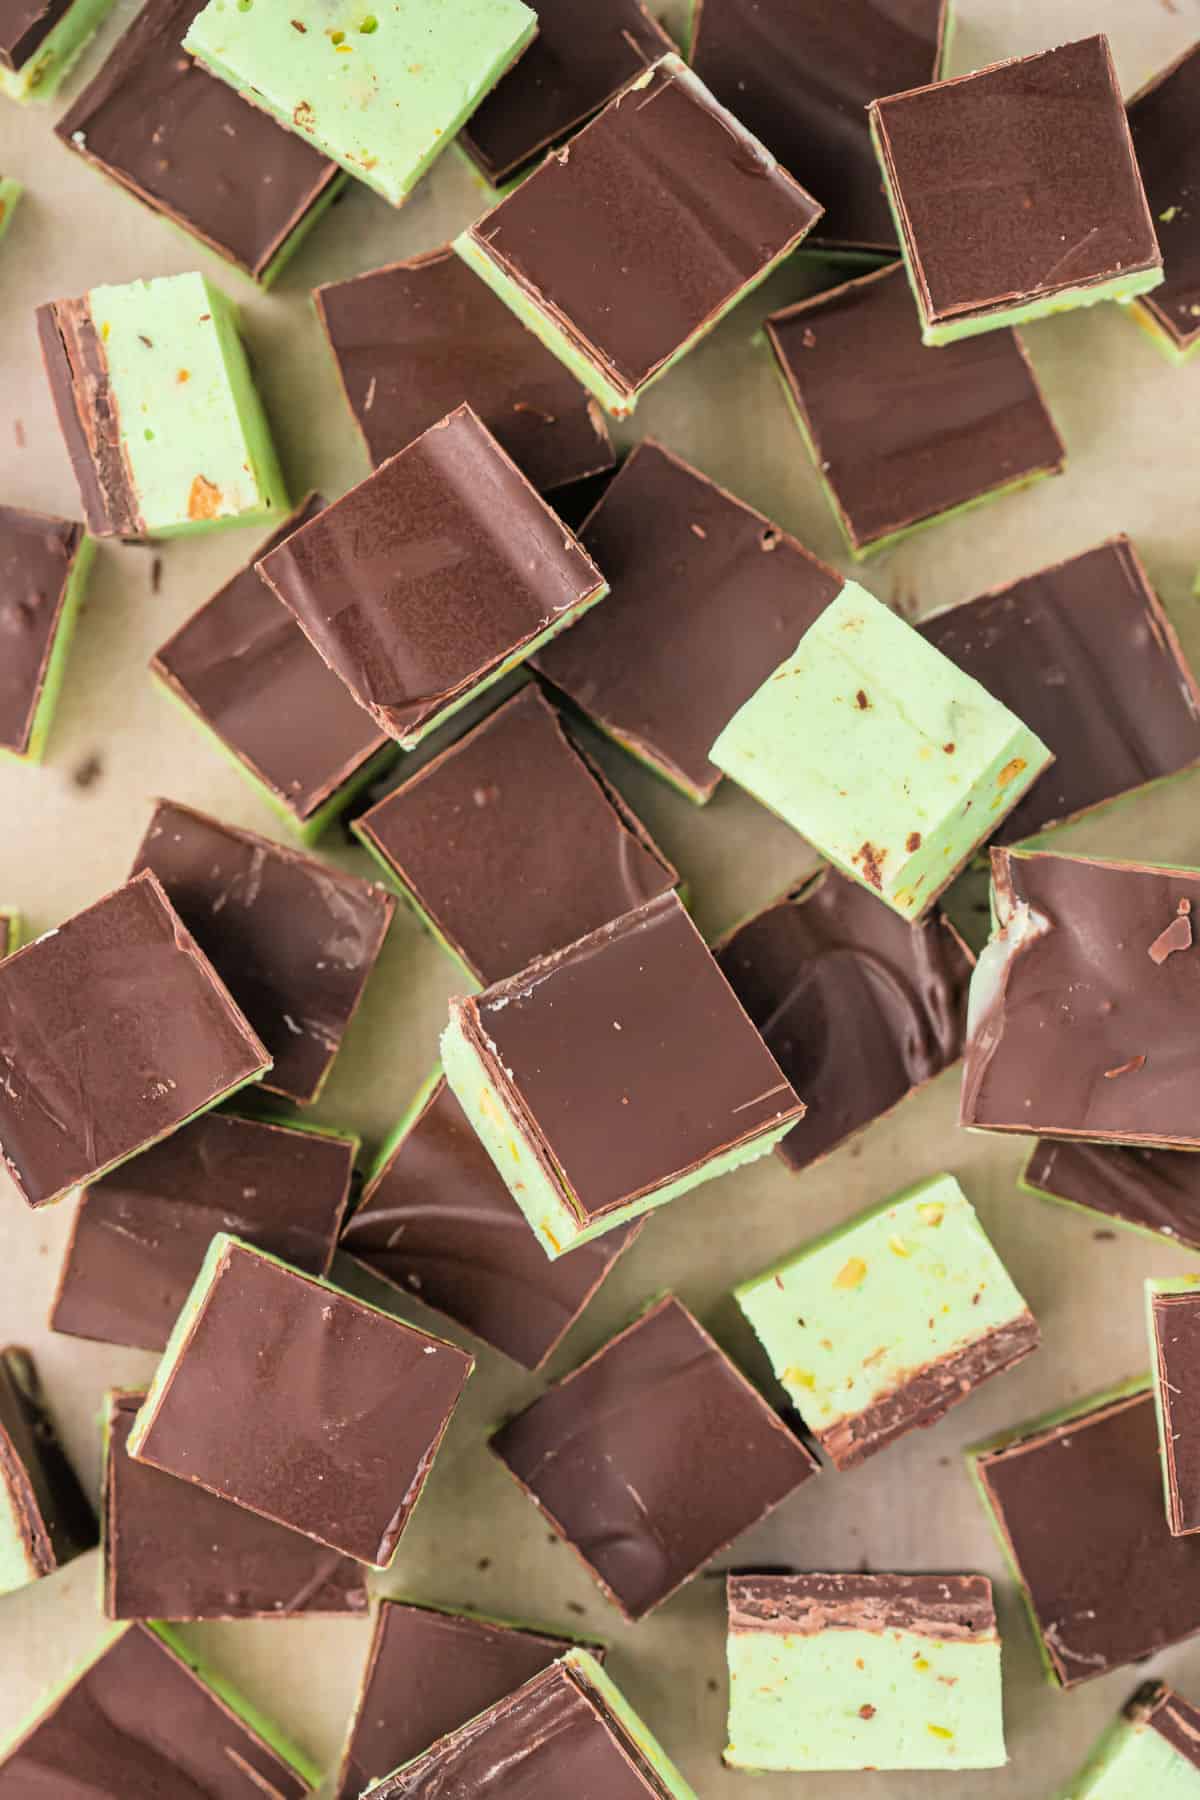 Pistachio fudge with dark chocolate served on a cutting board.